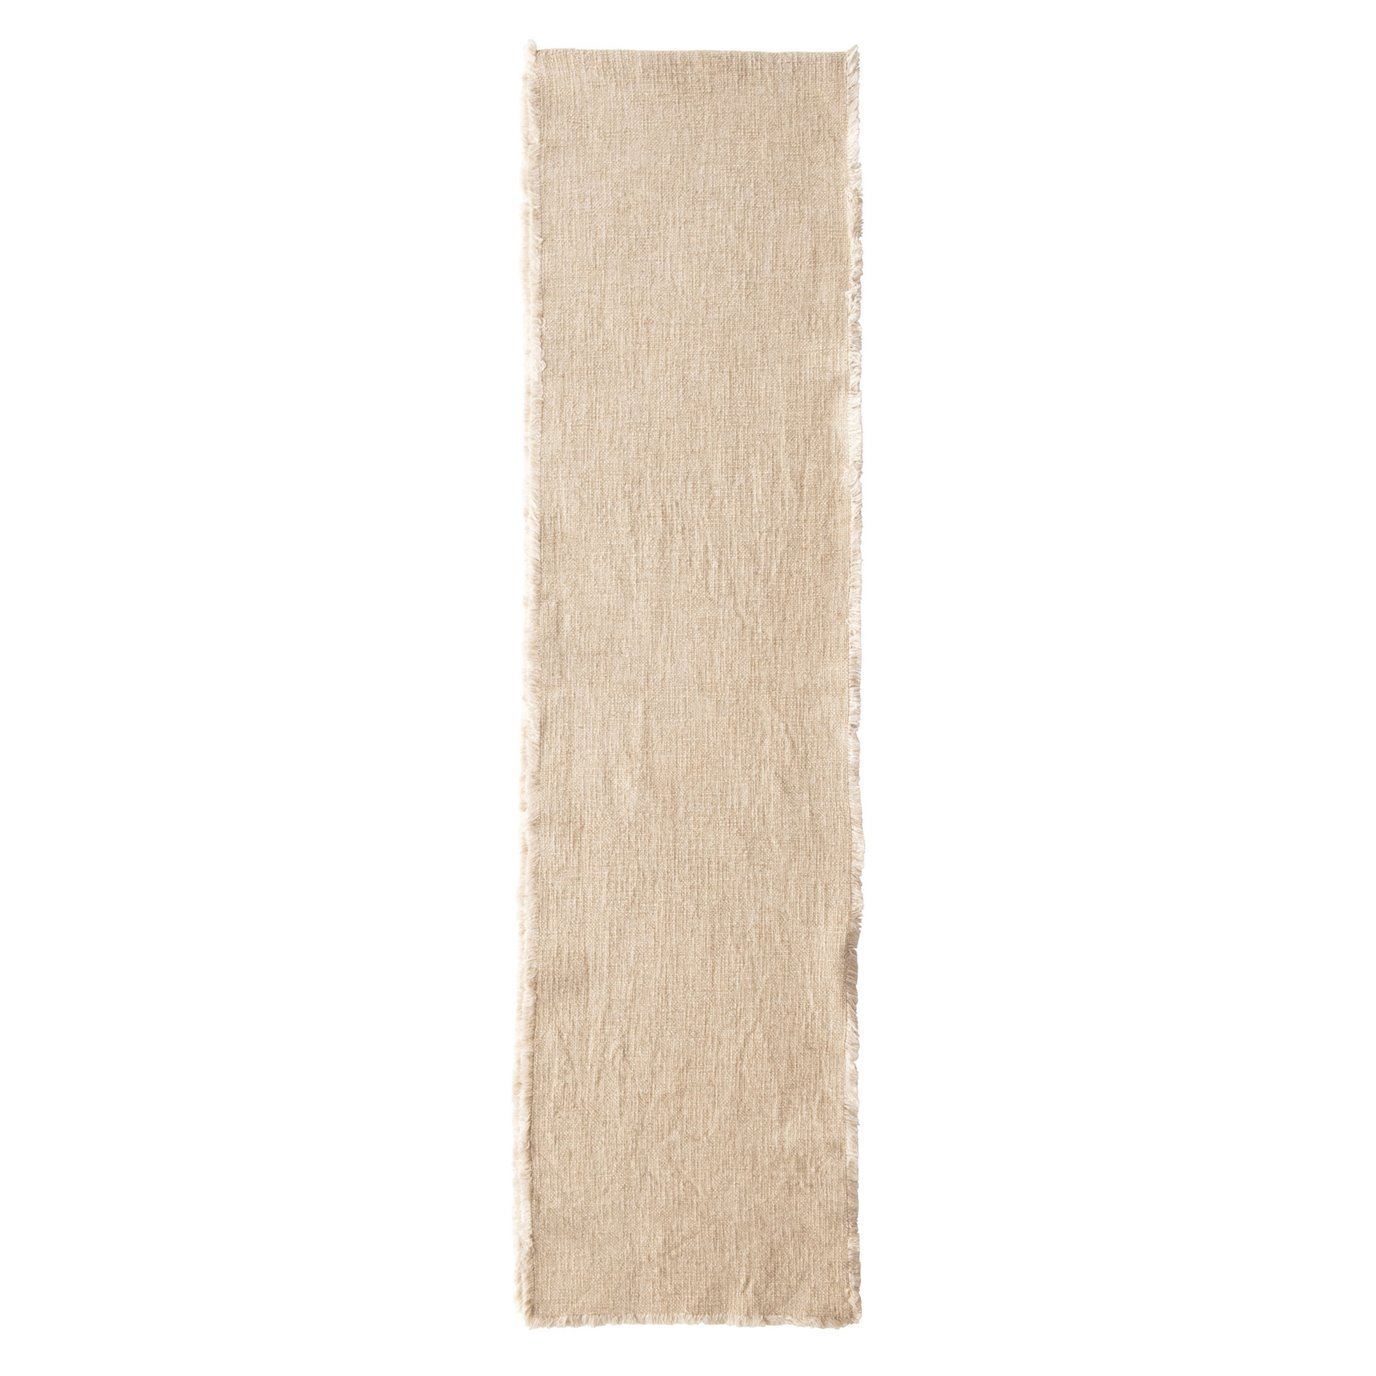 Linen Blend Table Runner with Frayed Edges, Natural